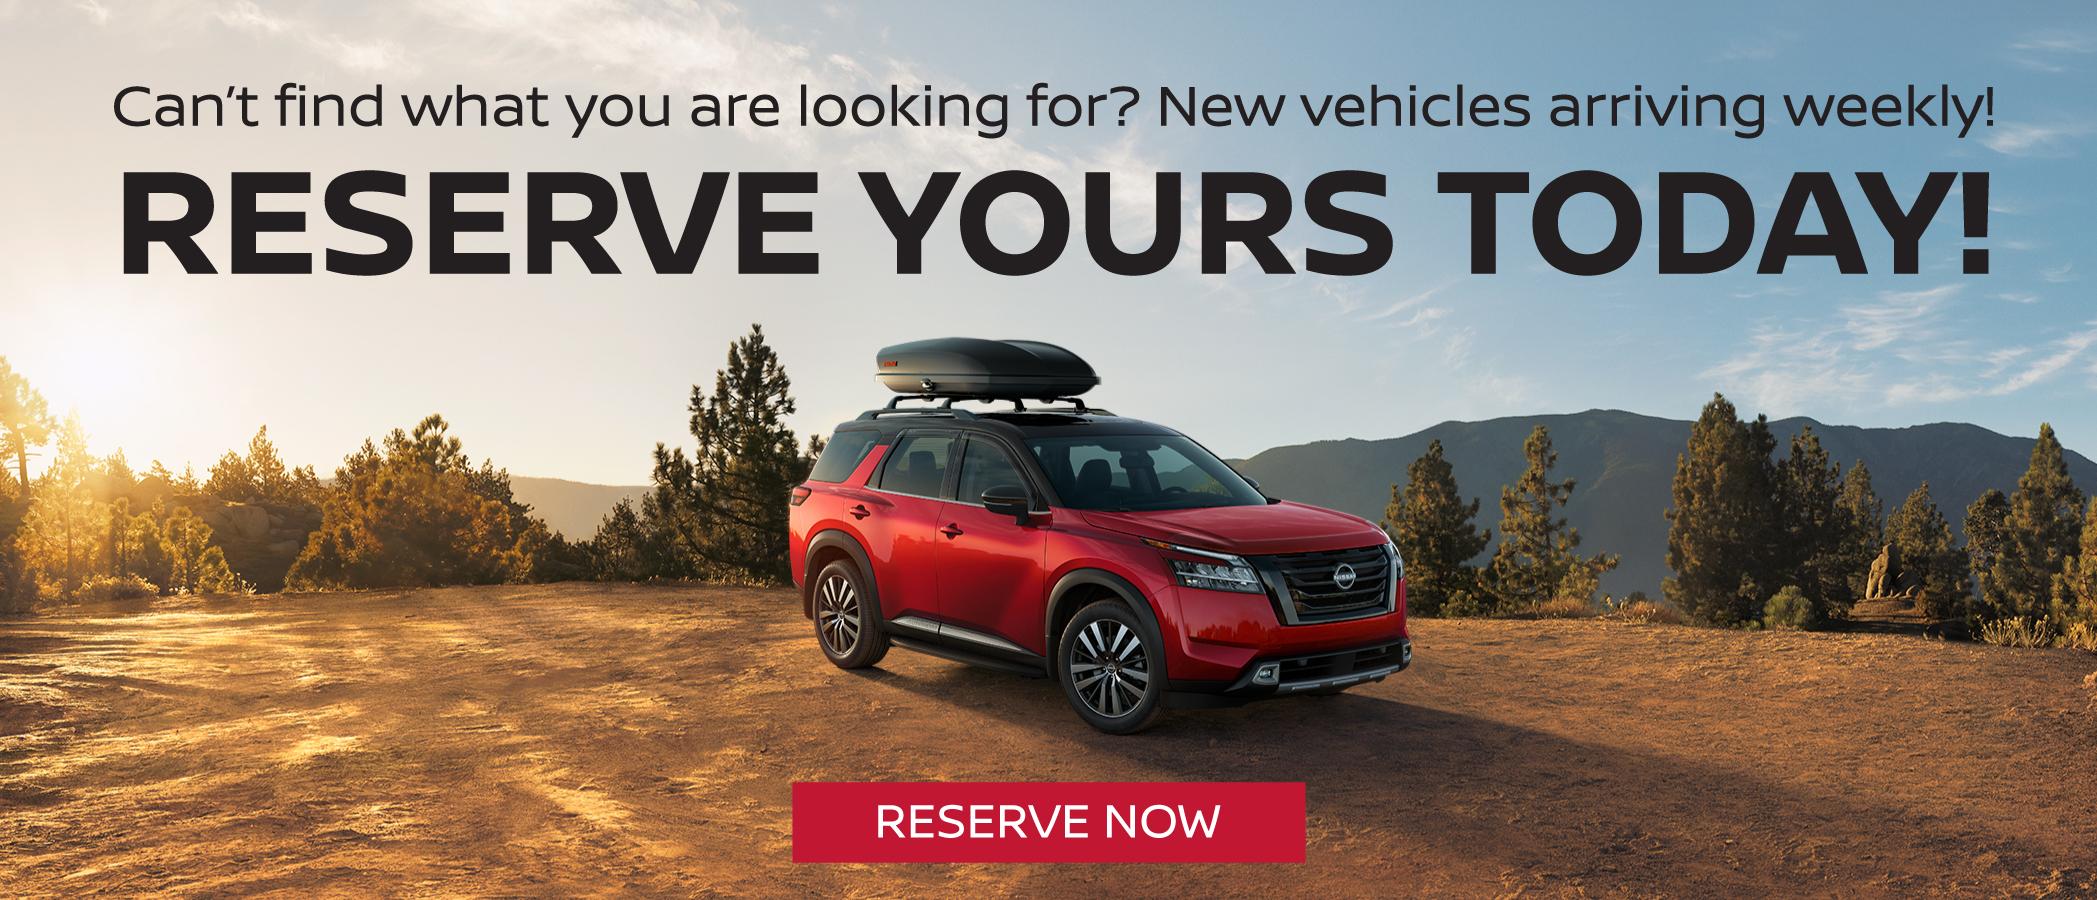 Reserve yours today Nissan